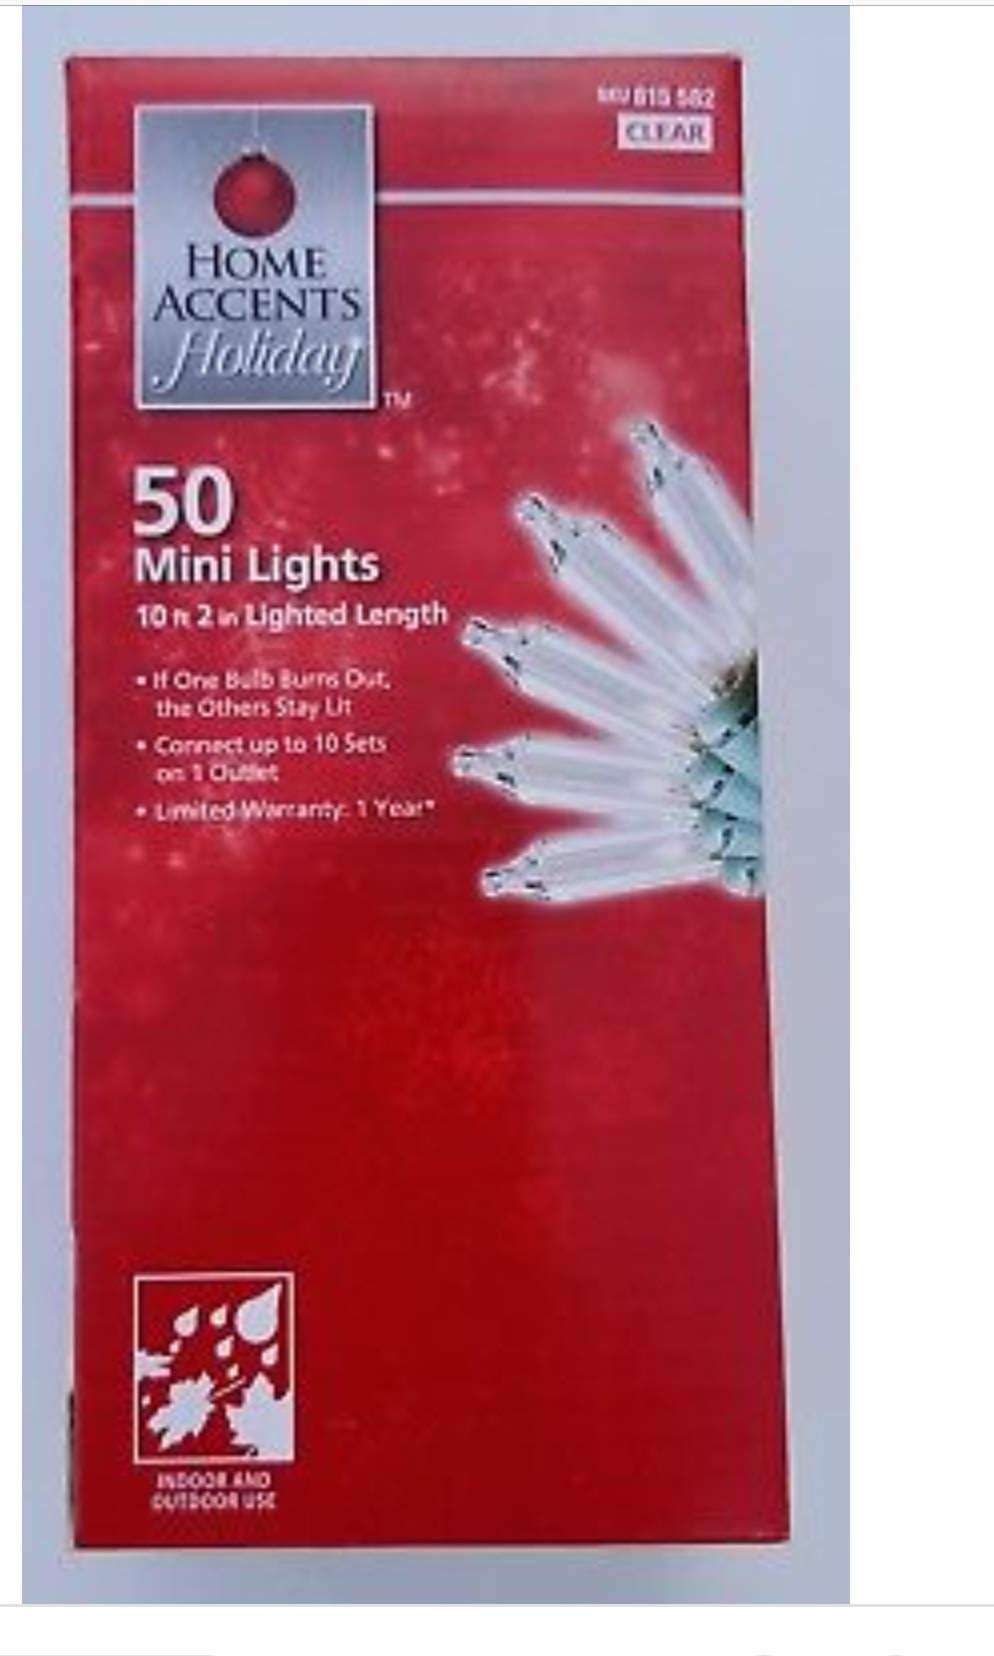 Home Accents 50 Mini Light String Clear Holiday Christmas Decoration Lot of 2 